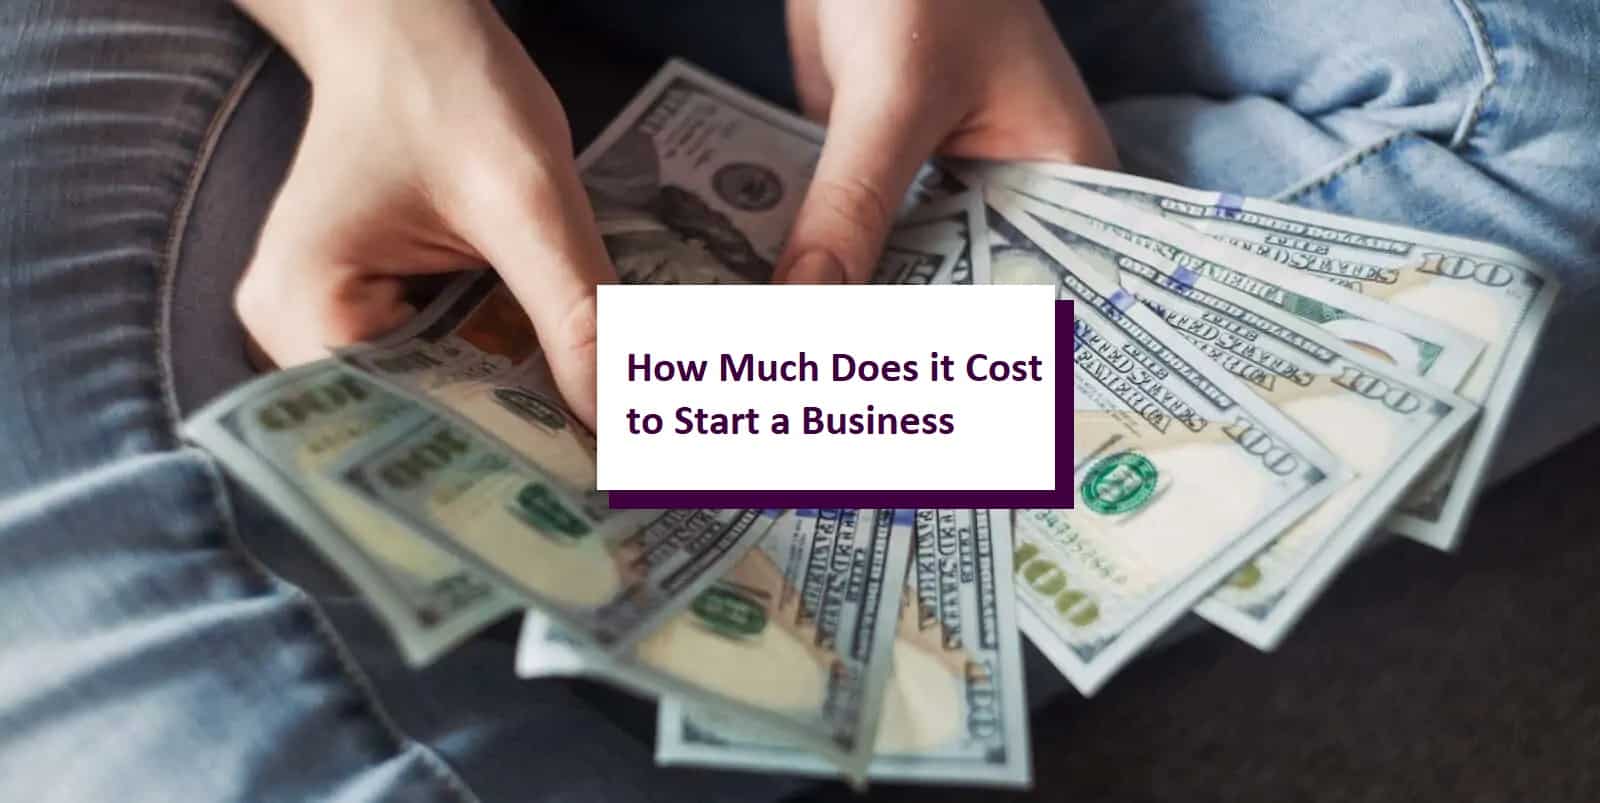 How Much Does it Cost to Start a Business